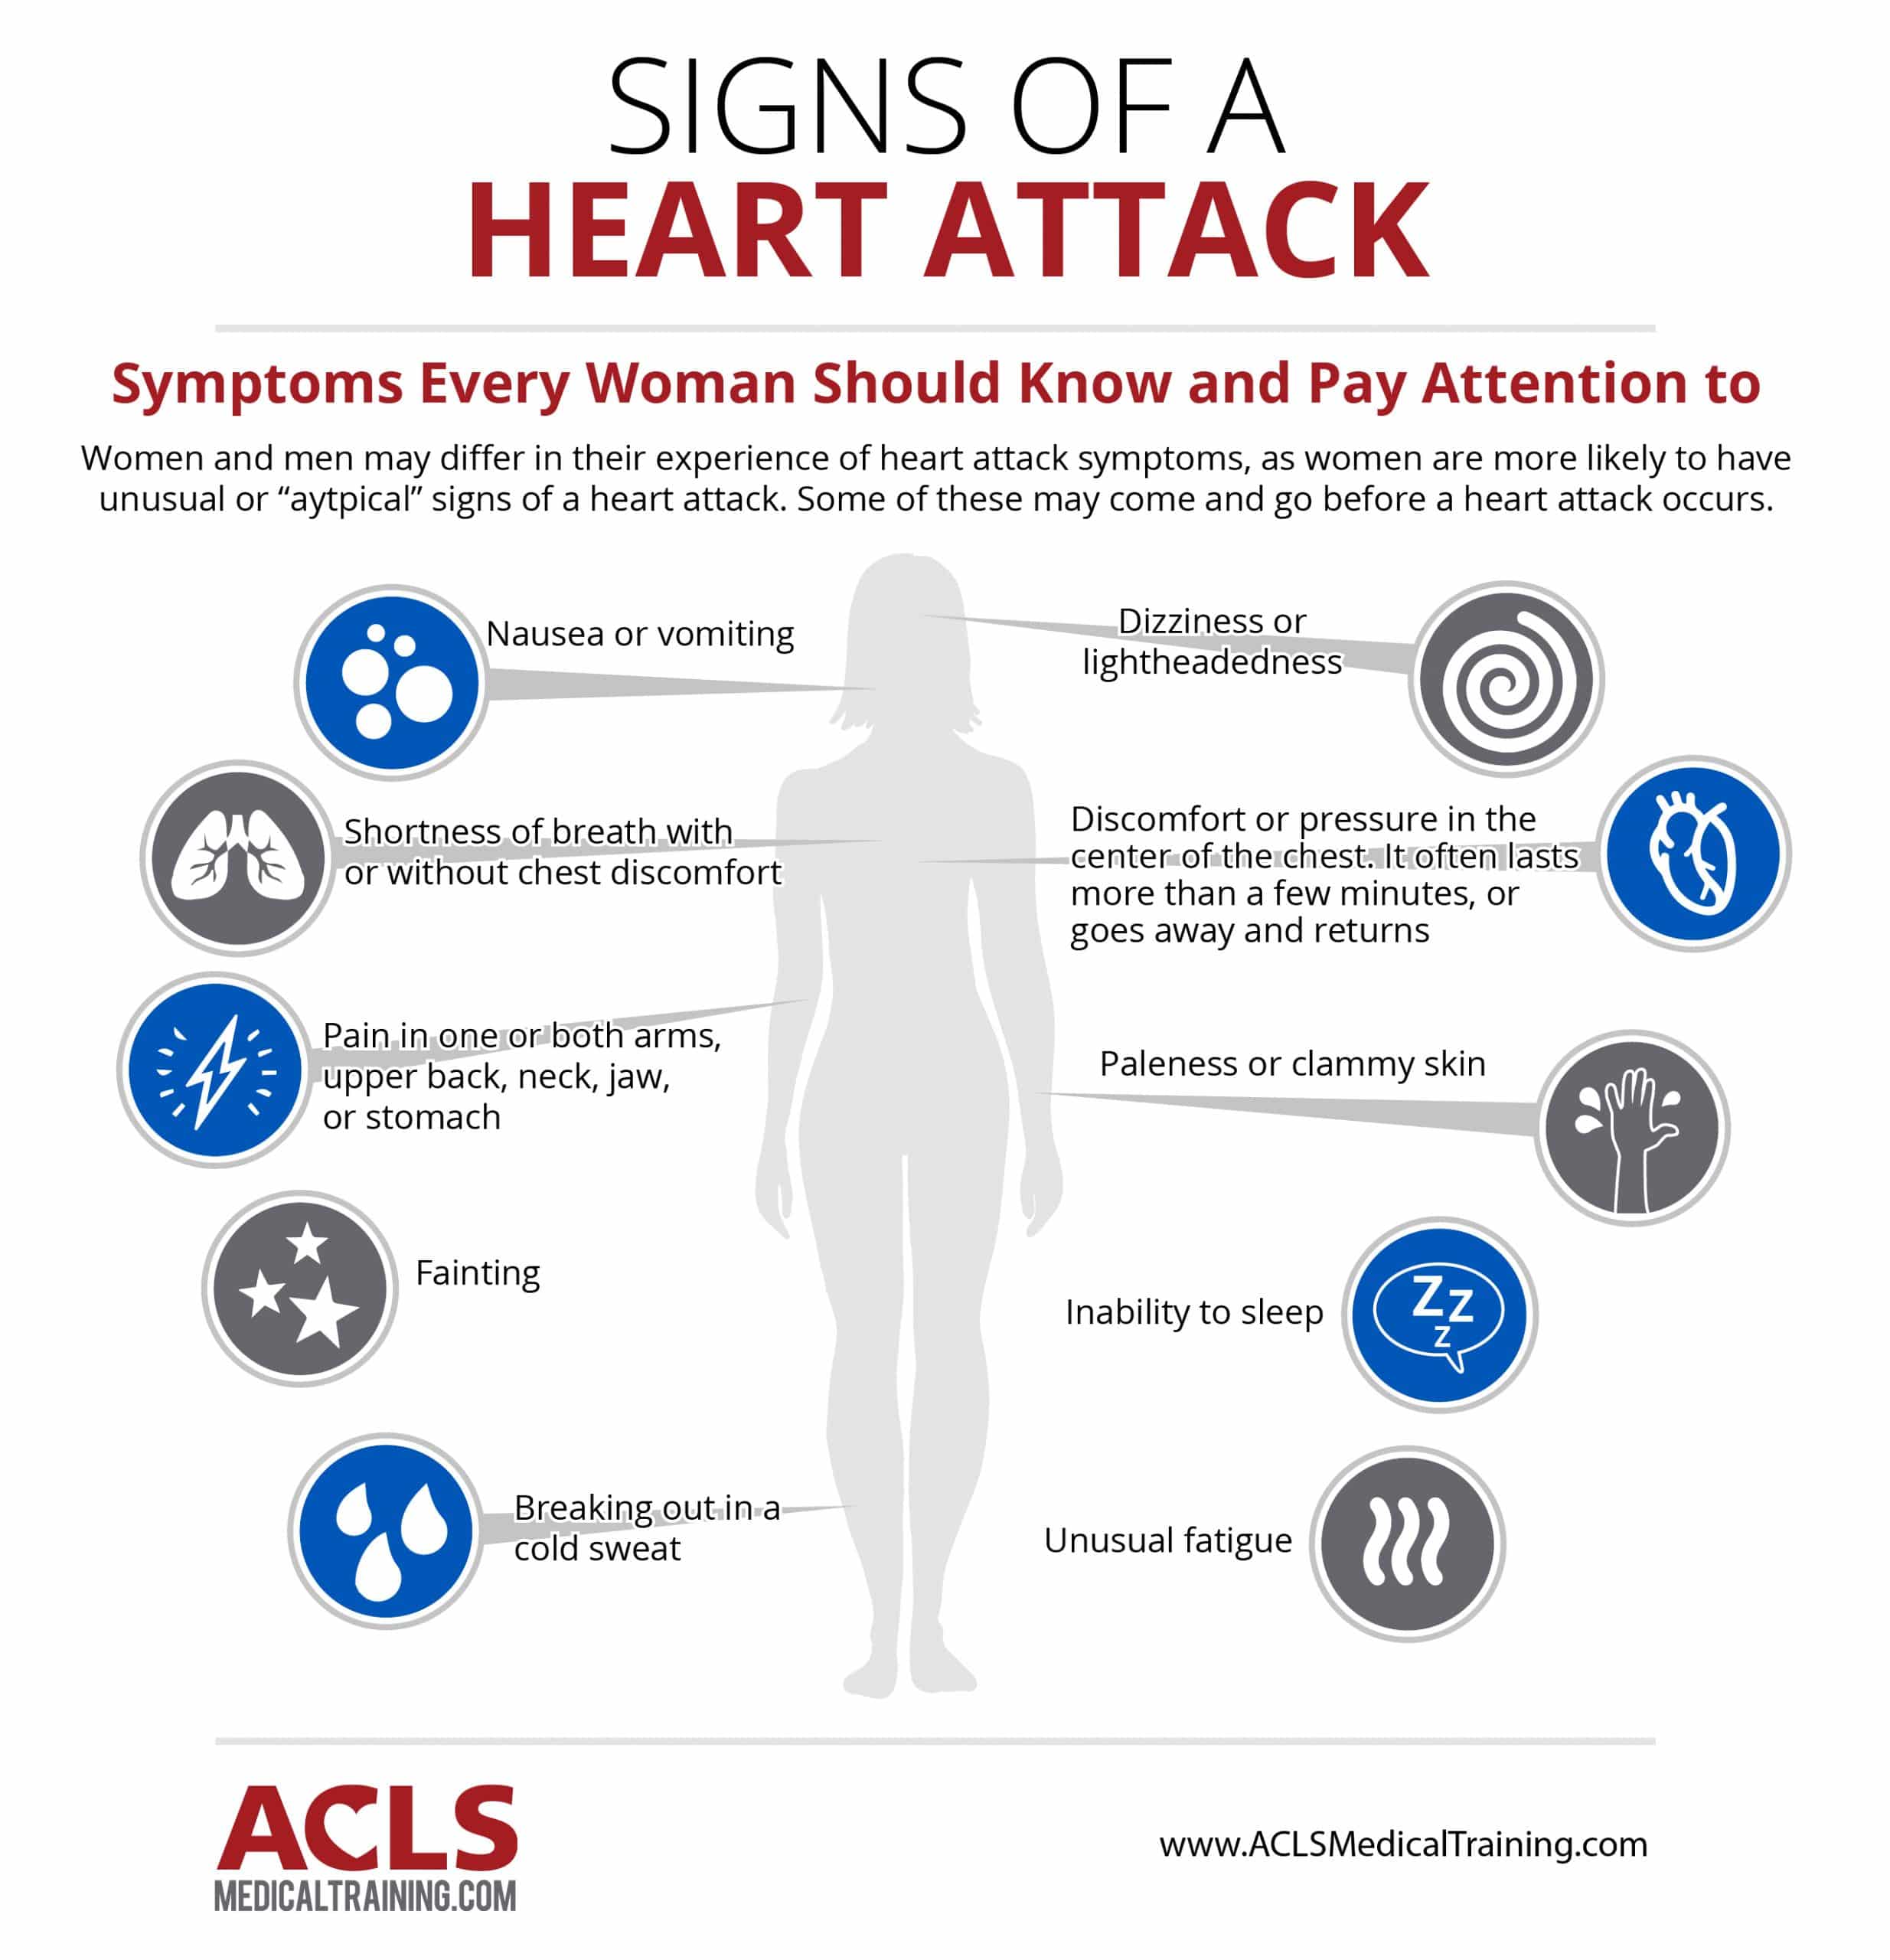 A Womanâs Heart Attack: Why and How It Is Different than a Manâs Heart ...